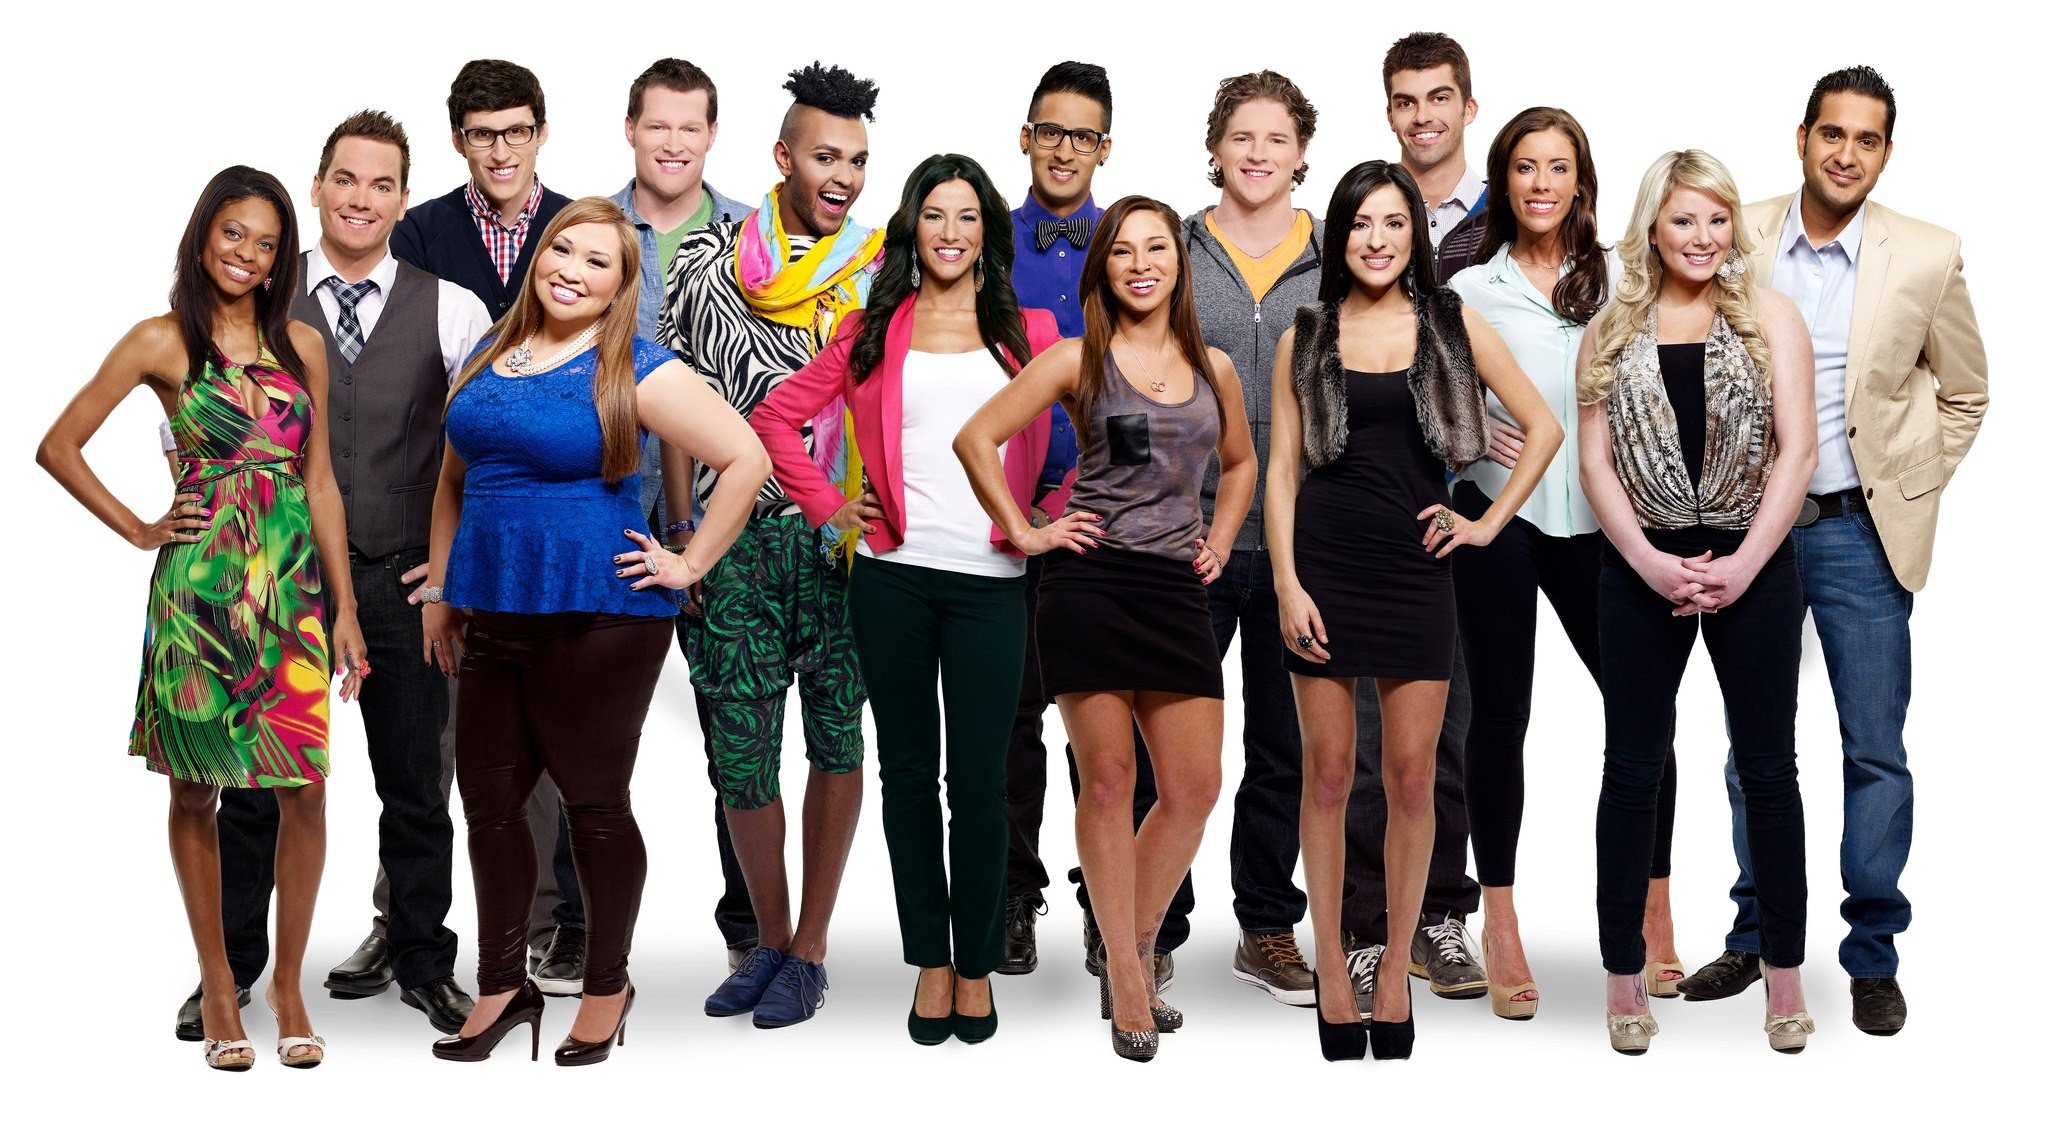 Big Brother Canada To Return in March